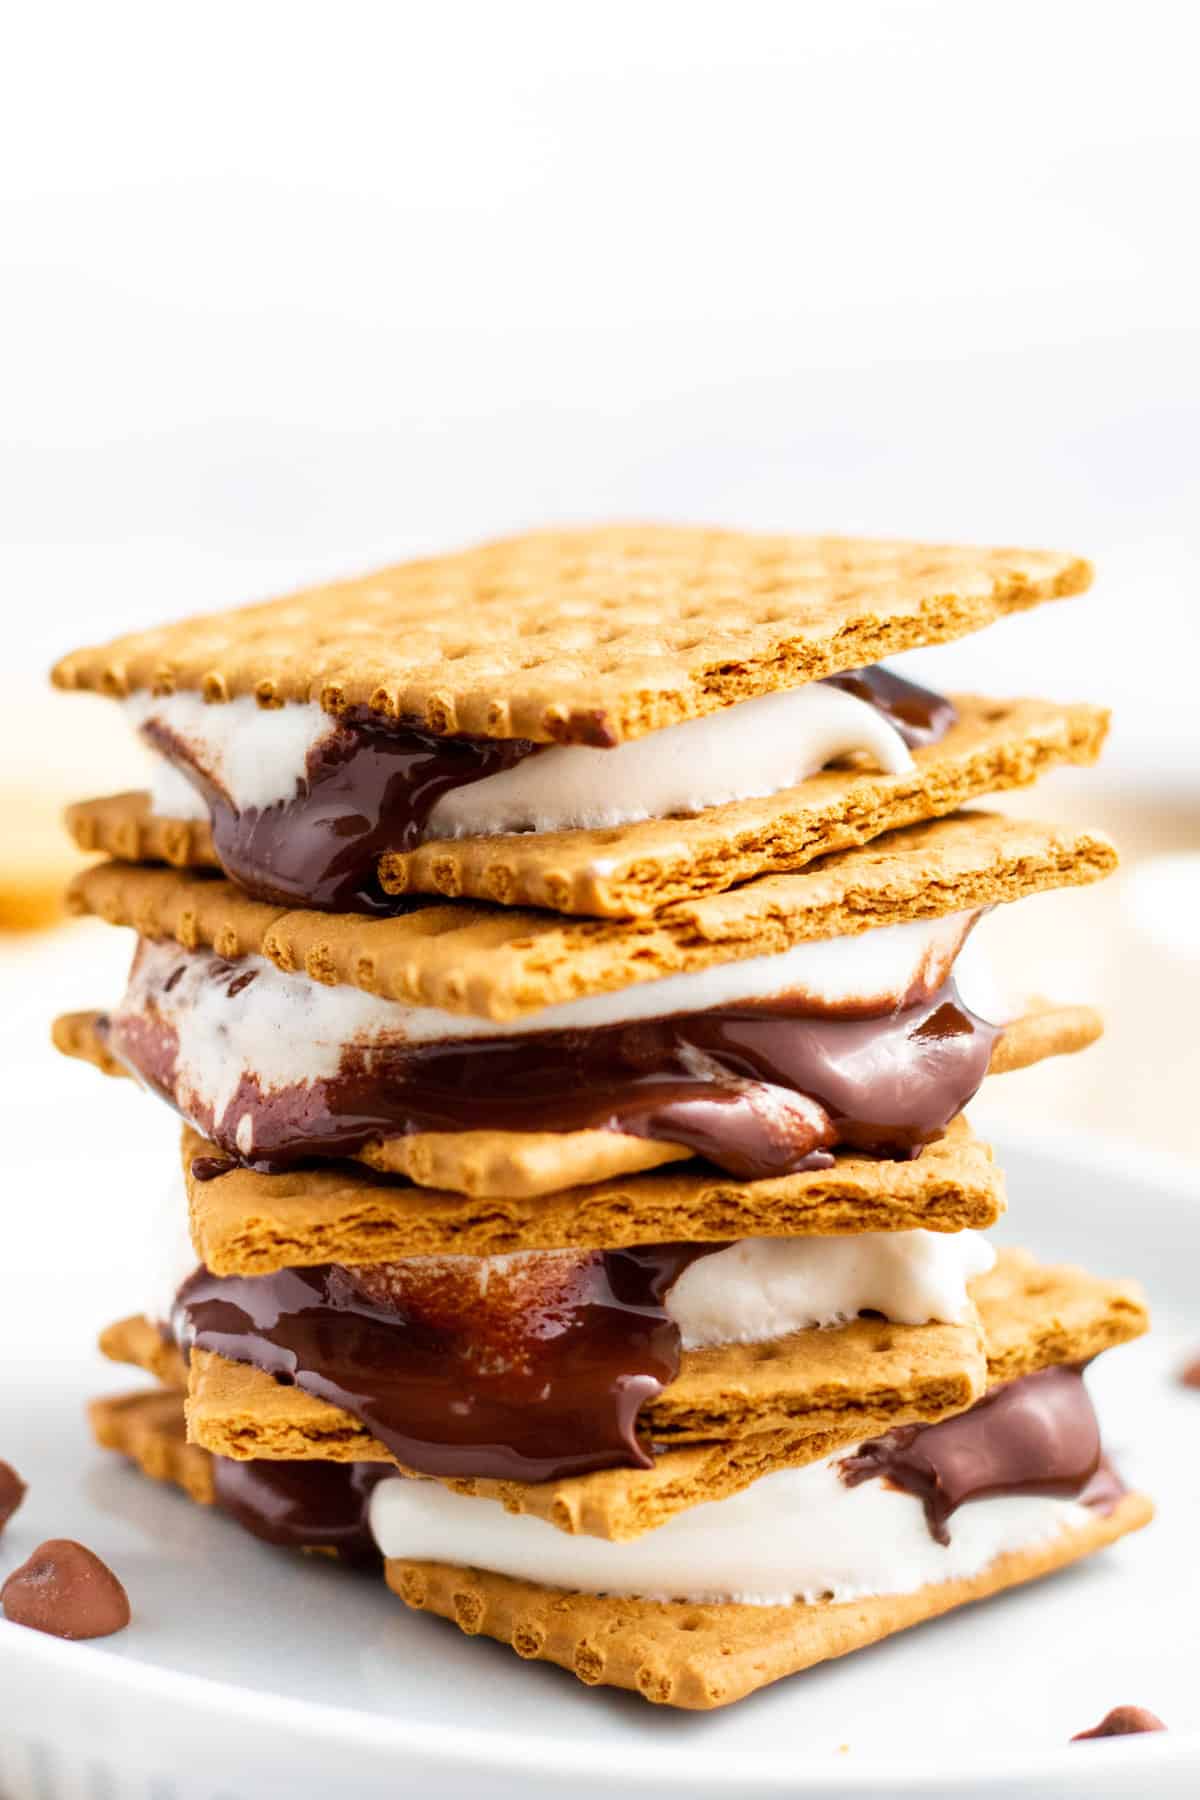 s'mores made without a fire in a stack on a plate